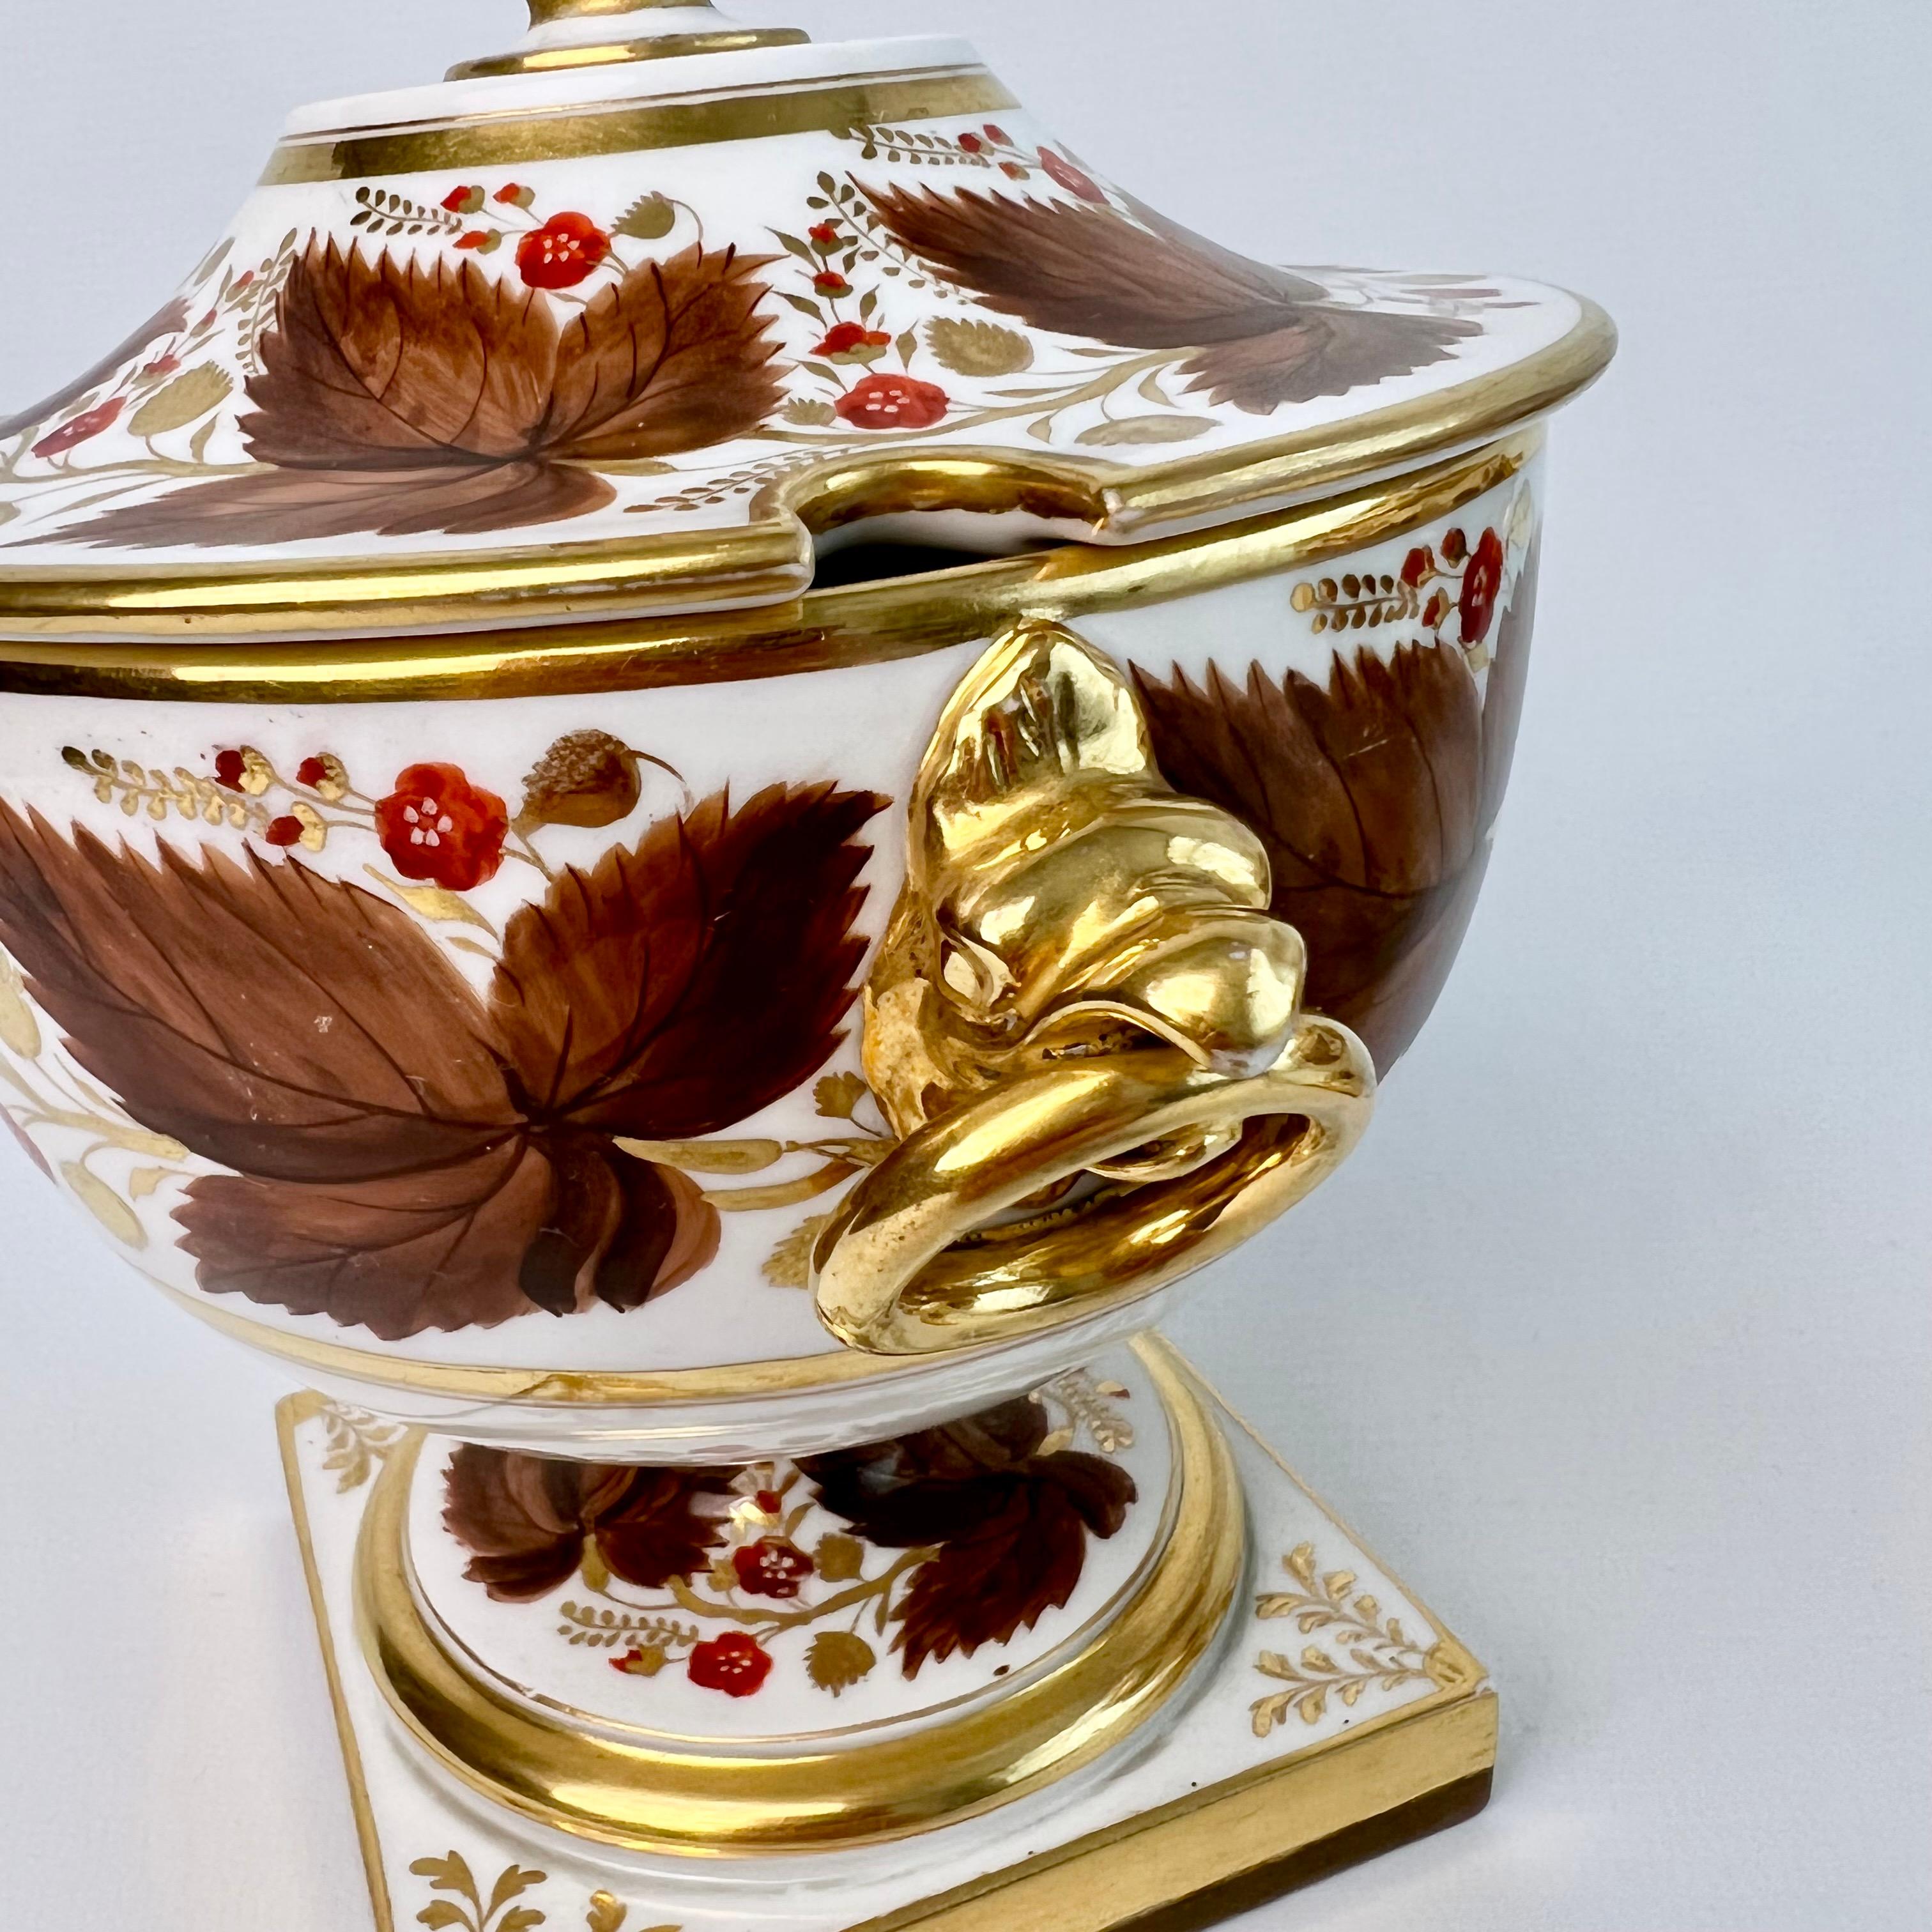 Hand-Painted Flight Barr & Barr Dessert Service, Brown Vines and Berries, 1815-1820 For Sale